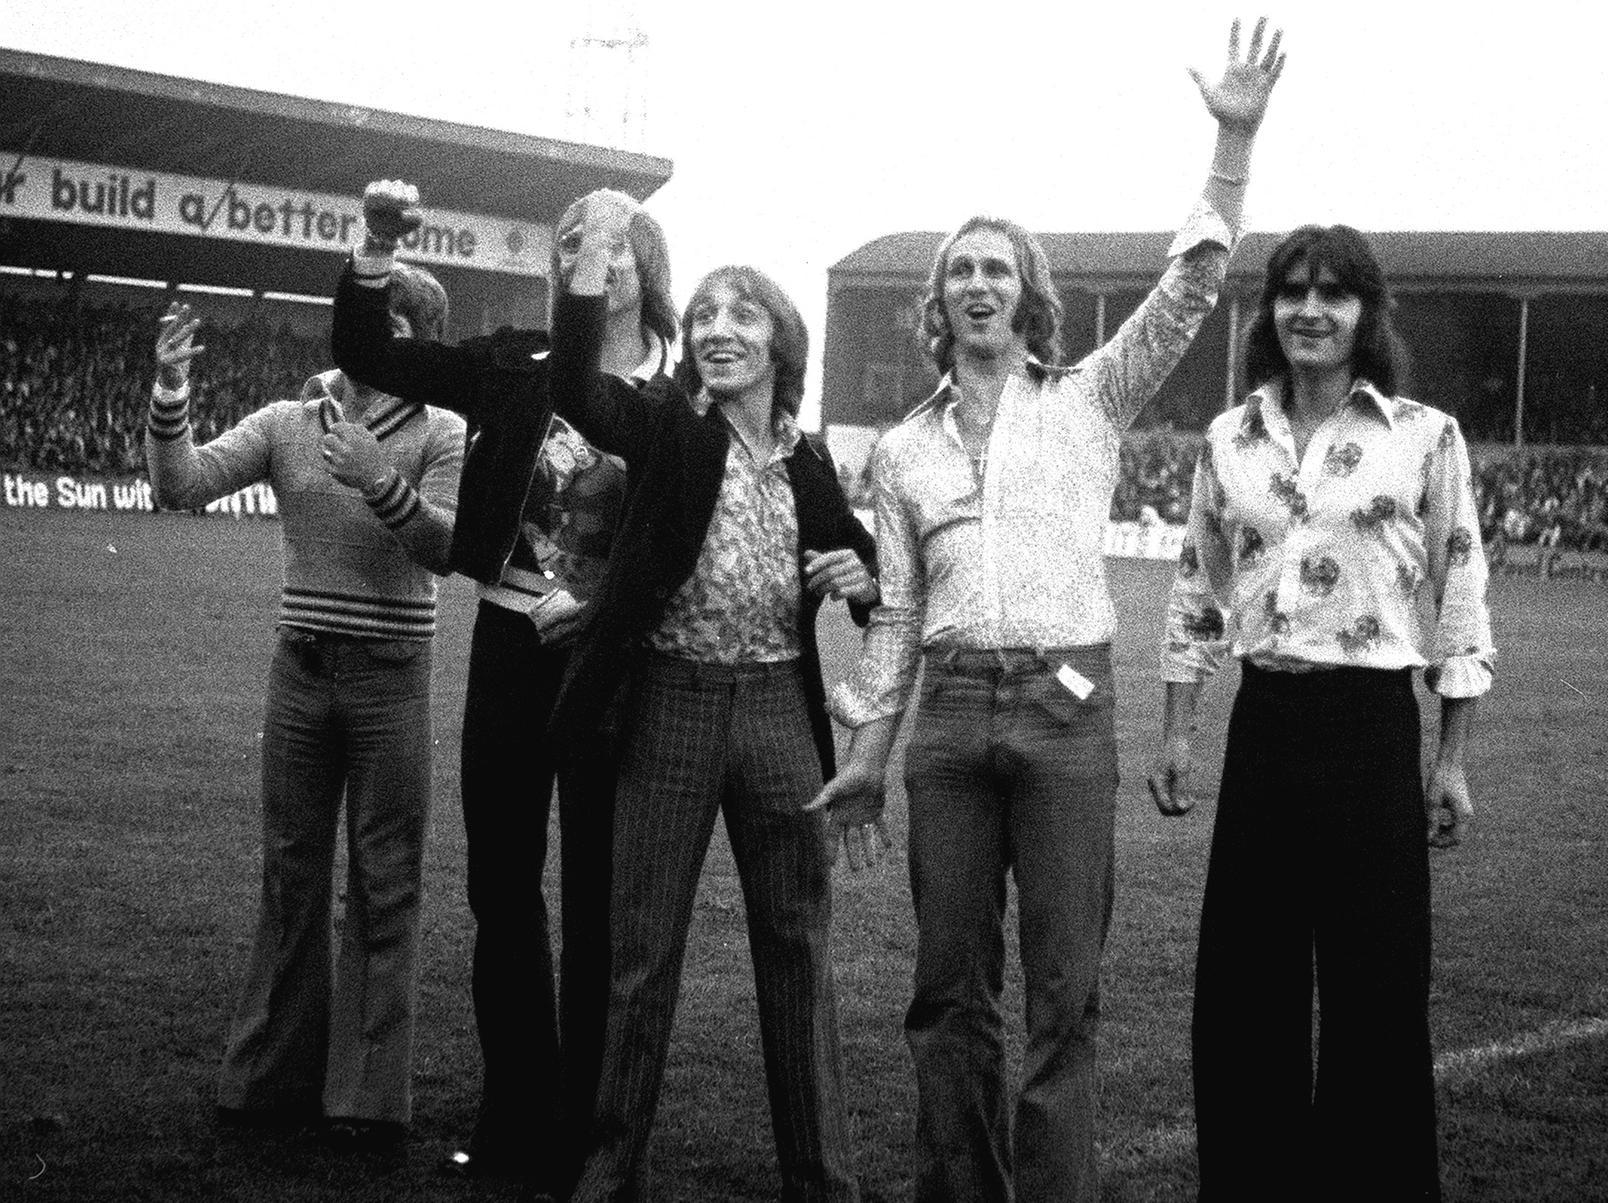 Five PNE fans on the pitch at a game in the 1970s